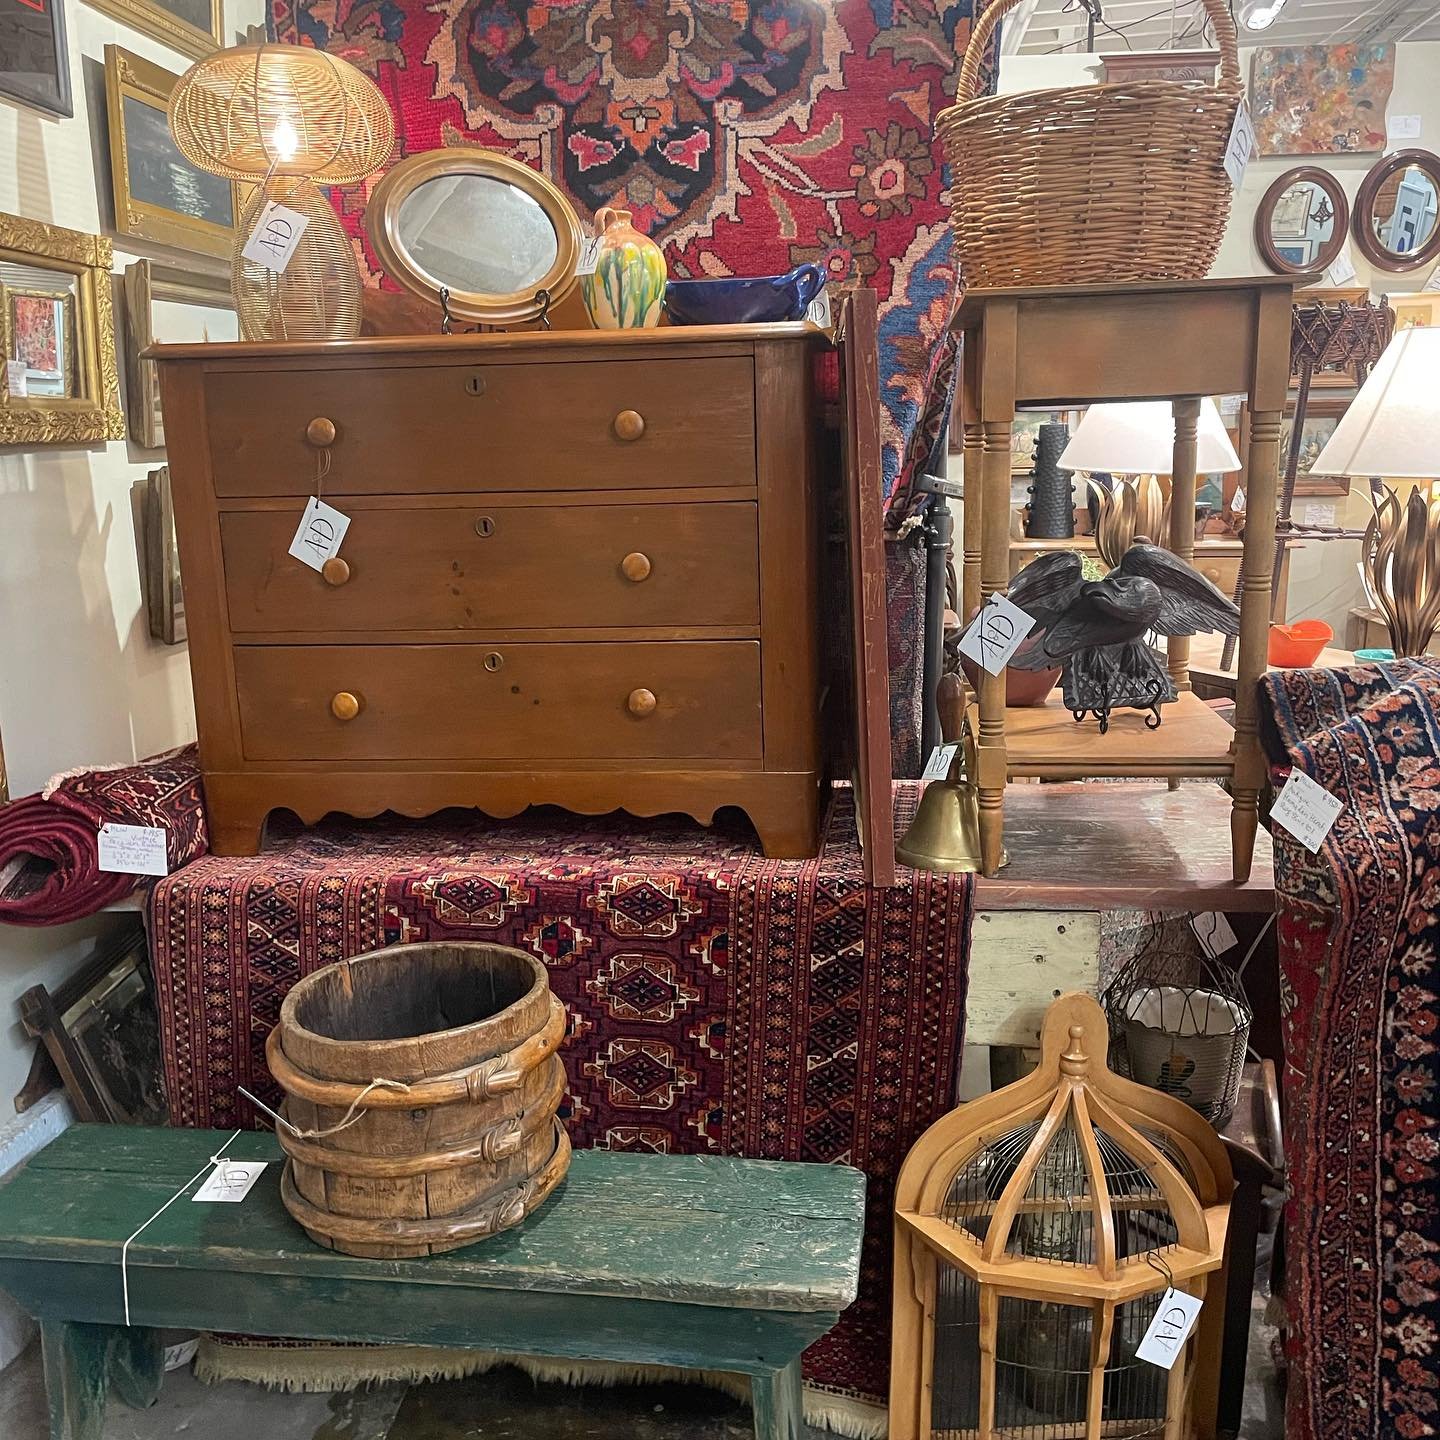 Add the charm to your home by buying vintage